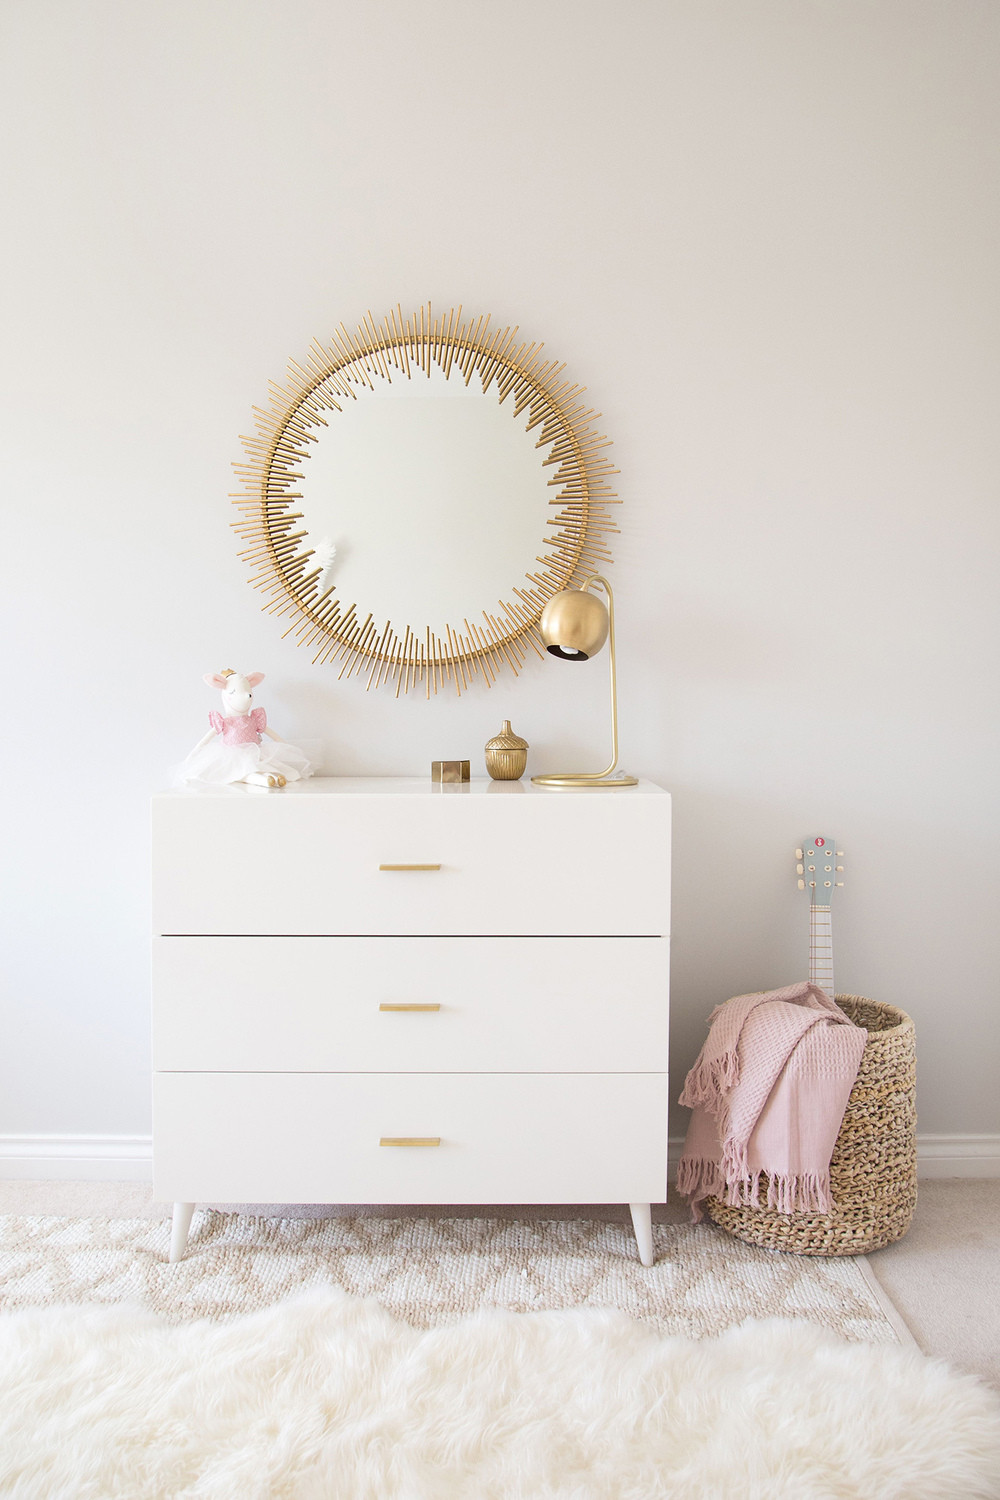 Mirrors For Kids Room
 6 STATEMENT GOLD MIRRORS — WINTER DAISY interiors for children